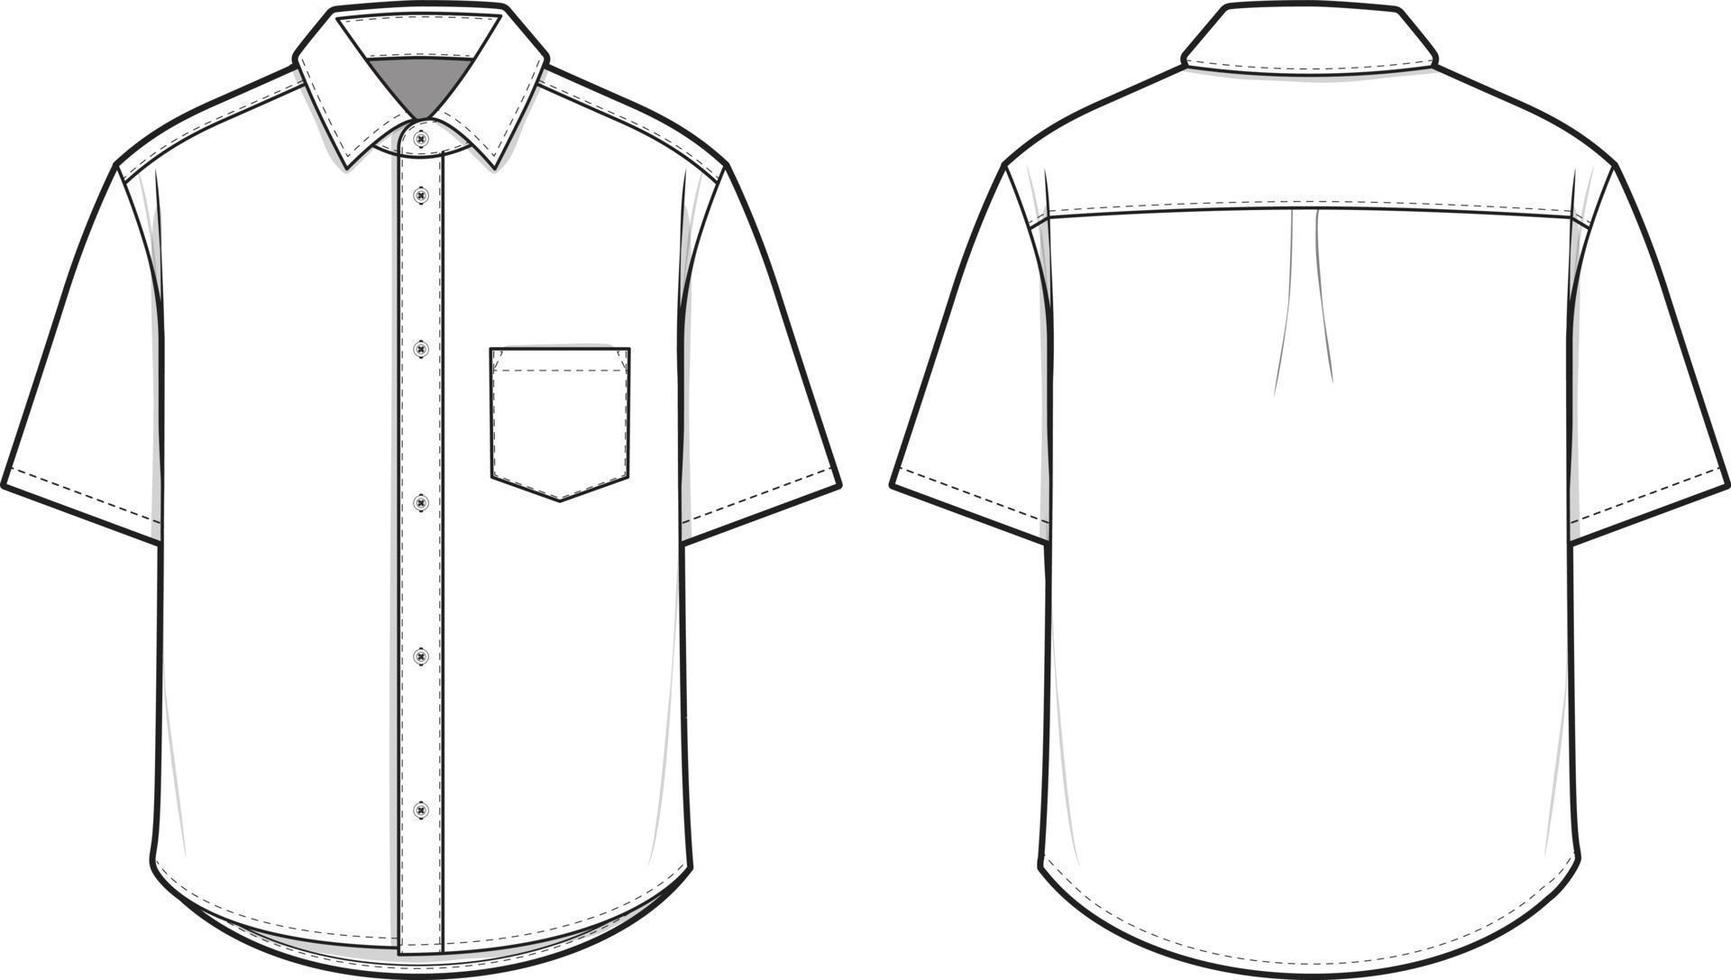 Oxford Collared Button Shirt Short Sleeve Flat Technical Drawing Illustration Blank Mock-up Template for Design and Tech Packs CAD vector